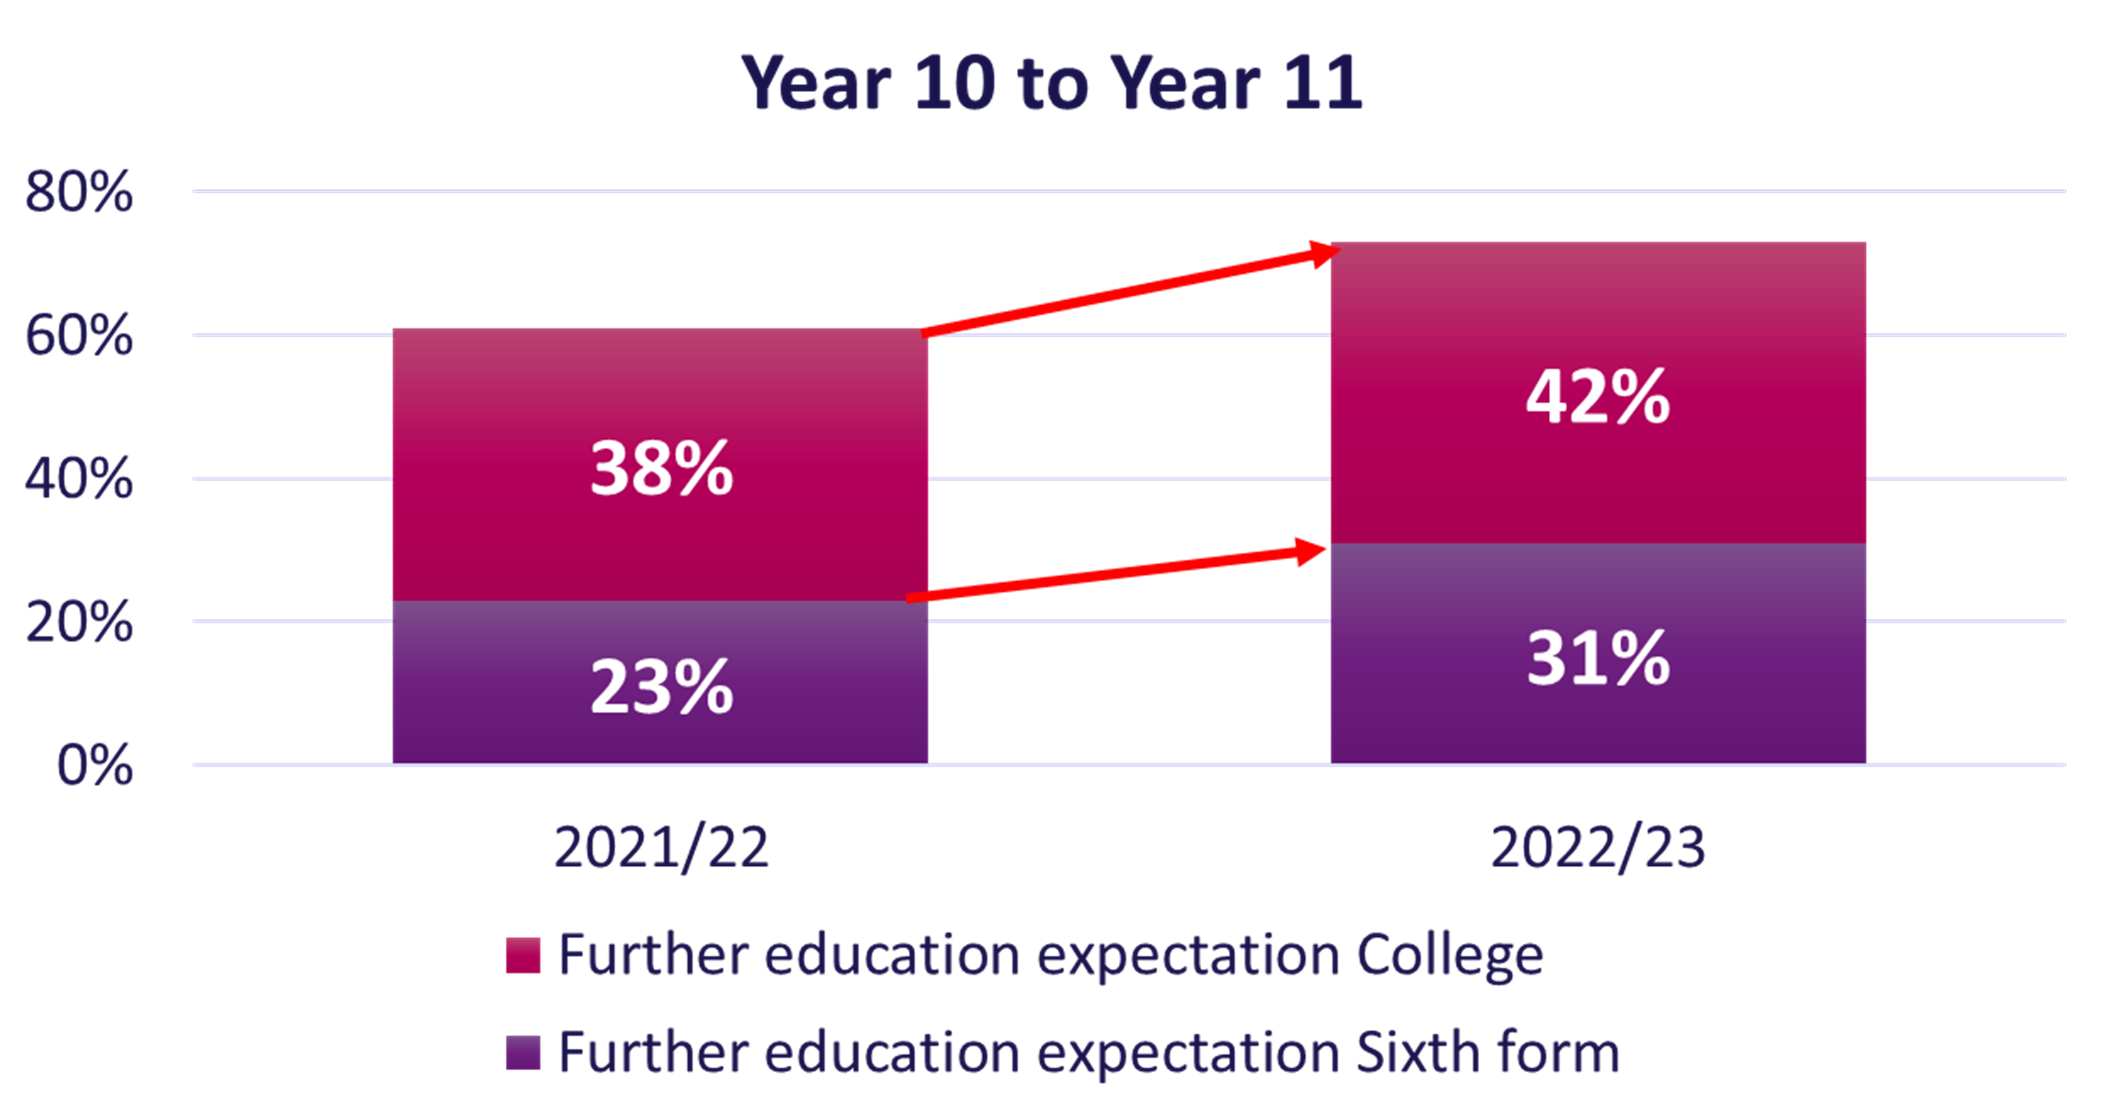 Improved expectation to progress to sixth form or college